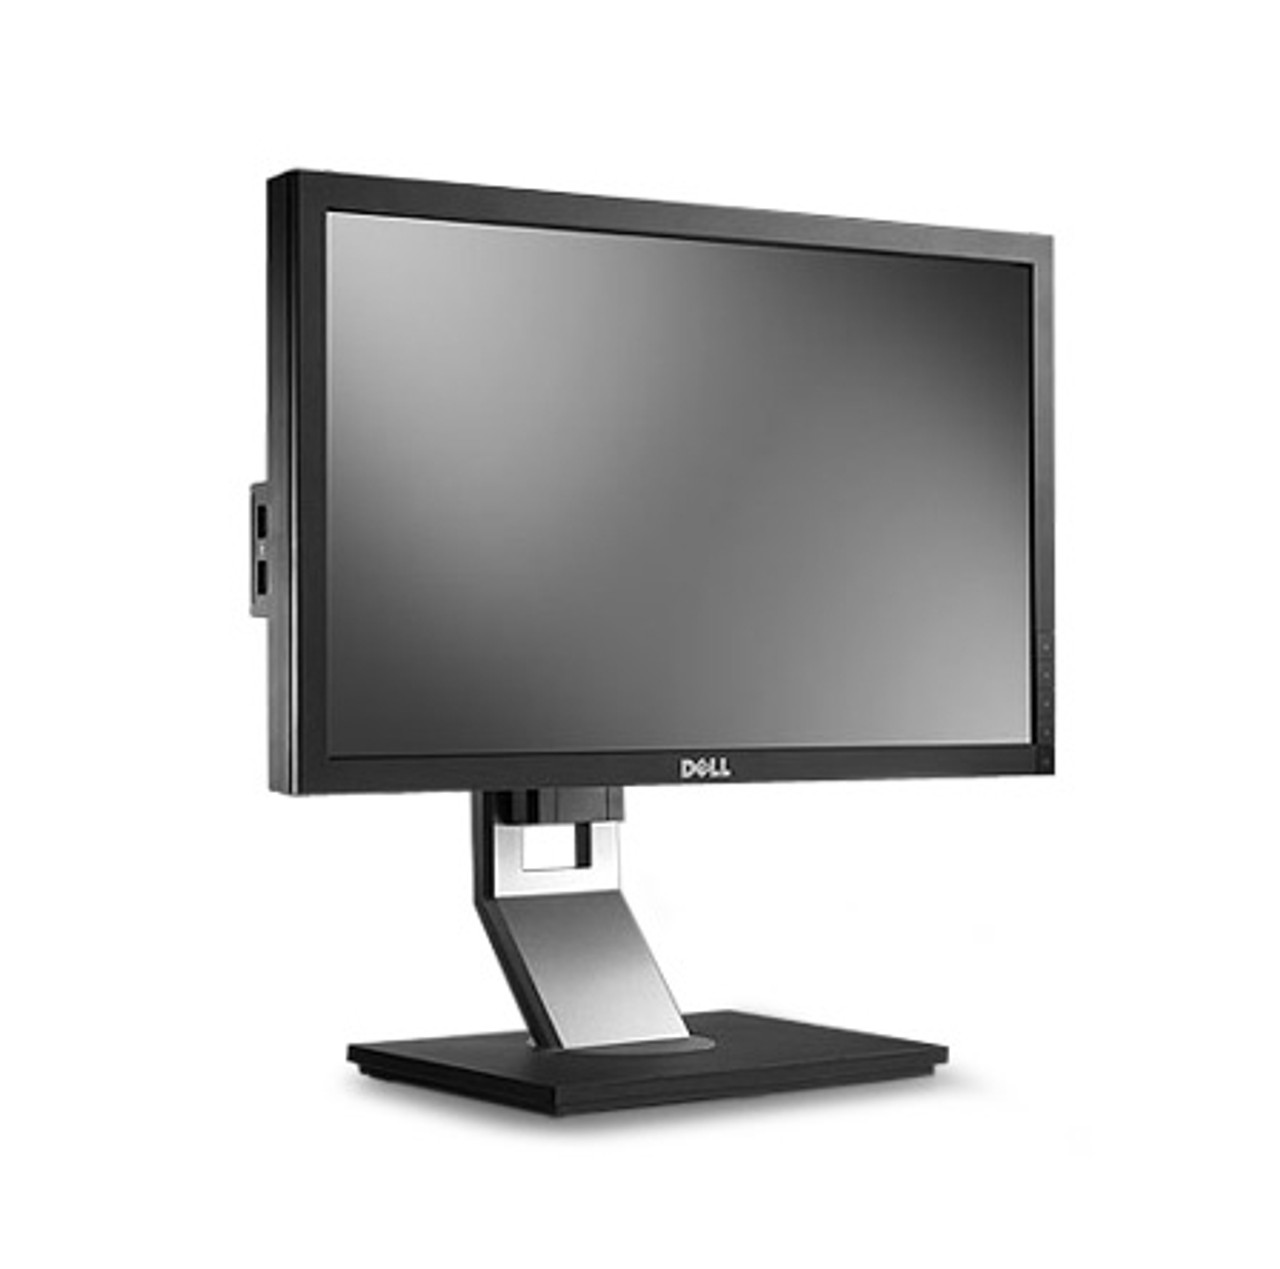 P2210 | Dell 22-Inch 60hz (1680 X 1050) Widescreen Flat Panel Monitor ( Refurbished)